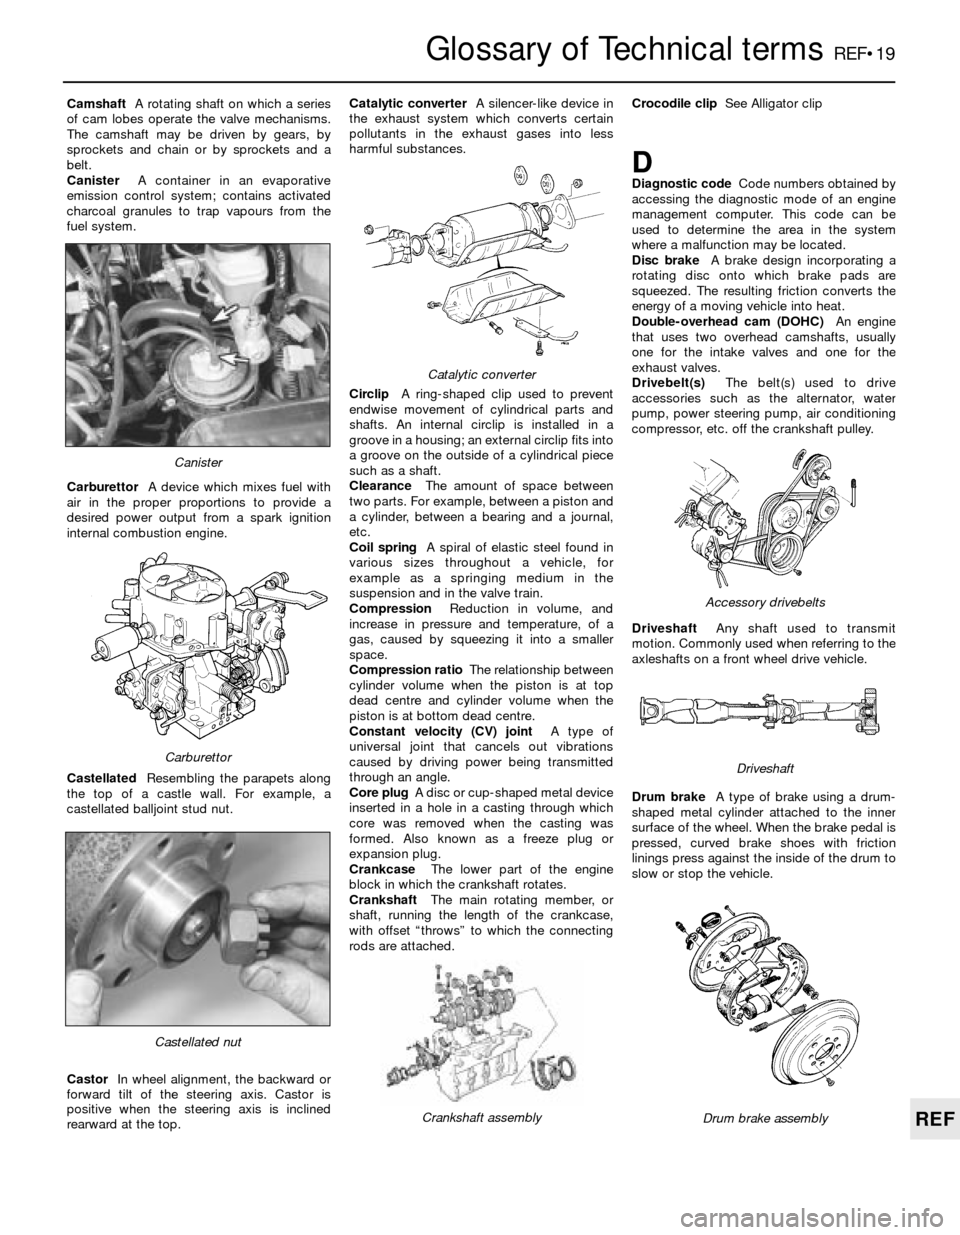 FORD SIERRA 1990 2.G Reference Workshop Manual Glossary of Technical termsREF•19
REF
CamshaftA rotating shaft on which a series
of cam lobes operate the valve mechanisms.
The camshaft may be driven by gears, by
sprockets and chain or by sprocket